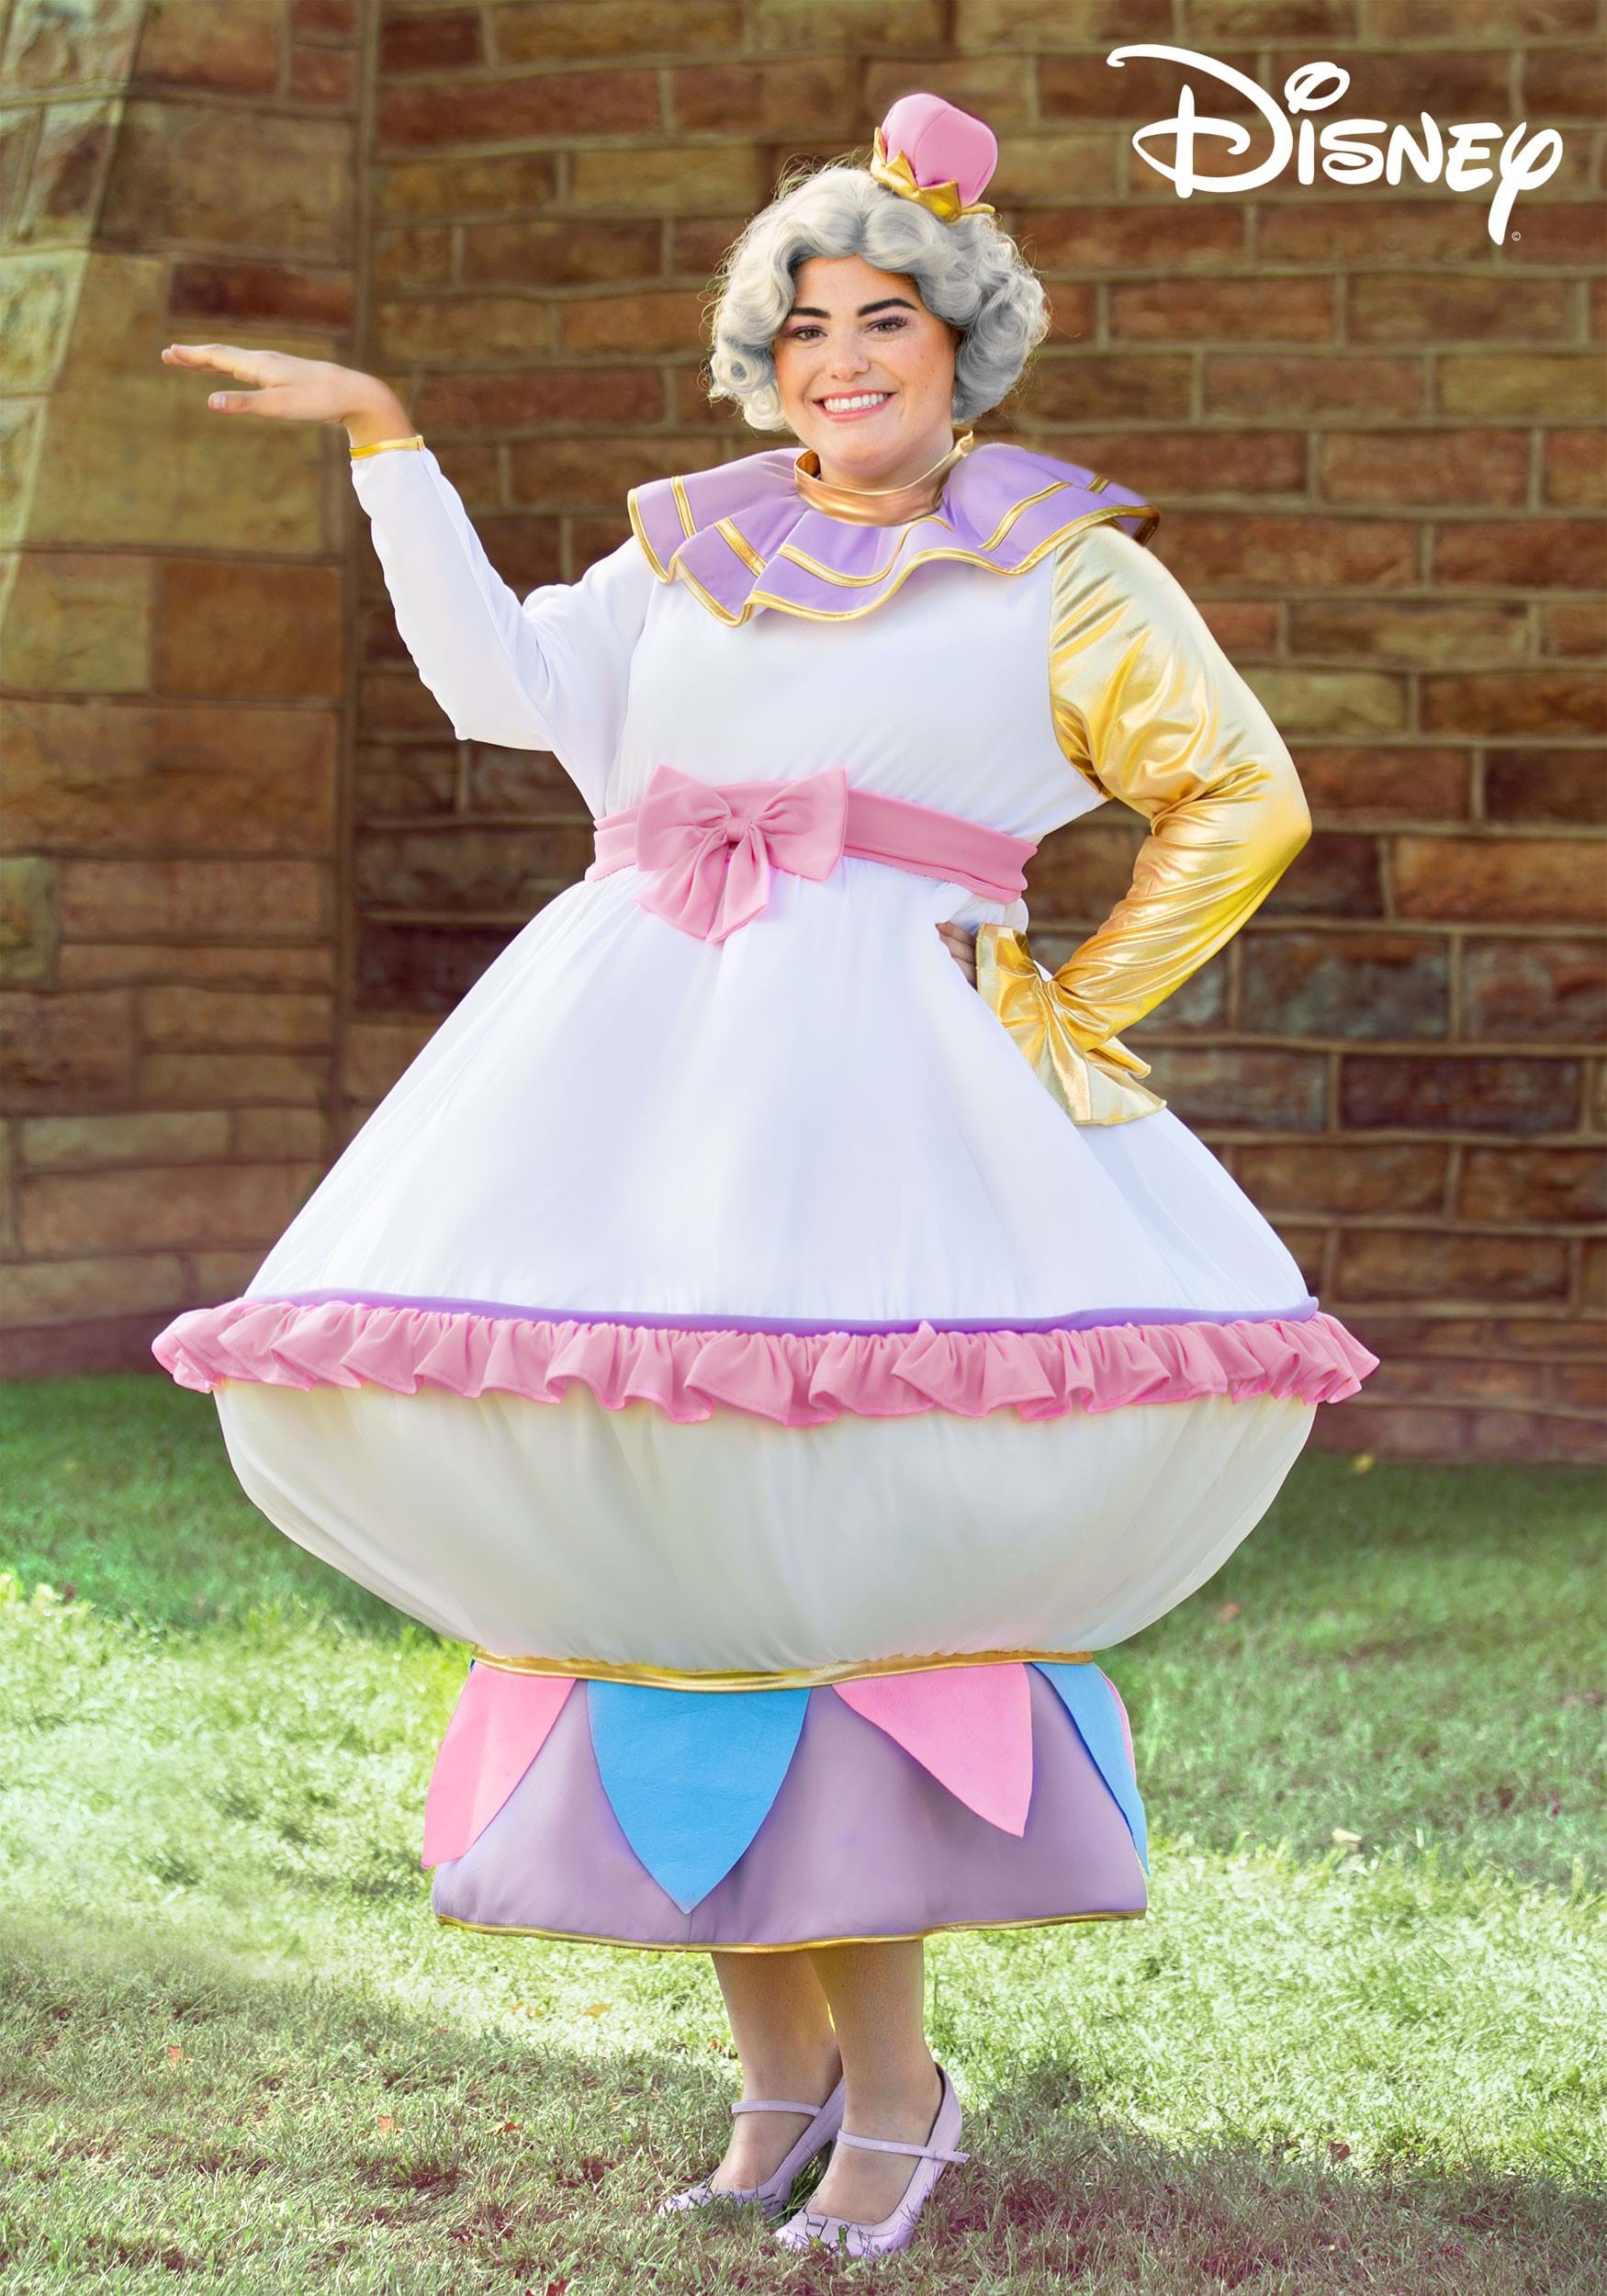 Beauty and the Beast Mrs. Potts Plus Size Costume for Women